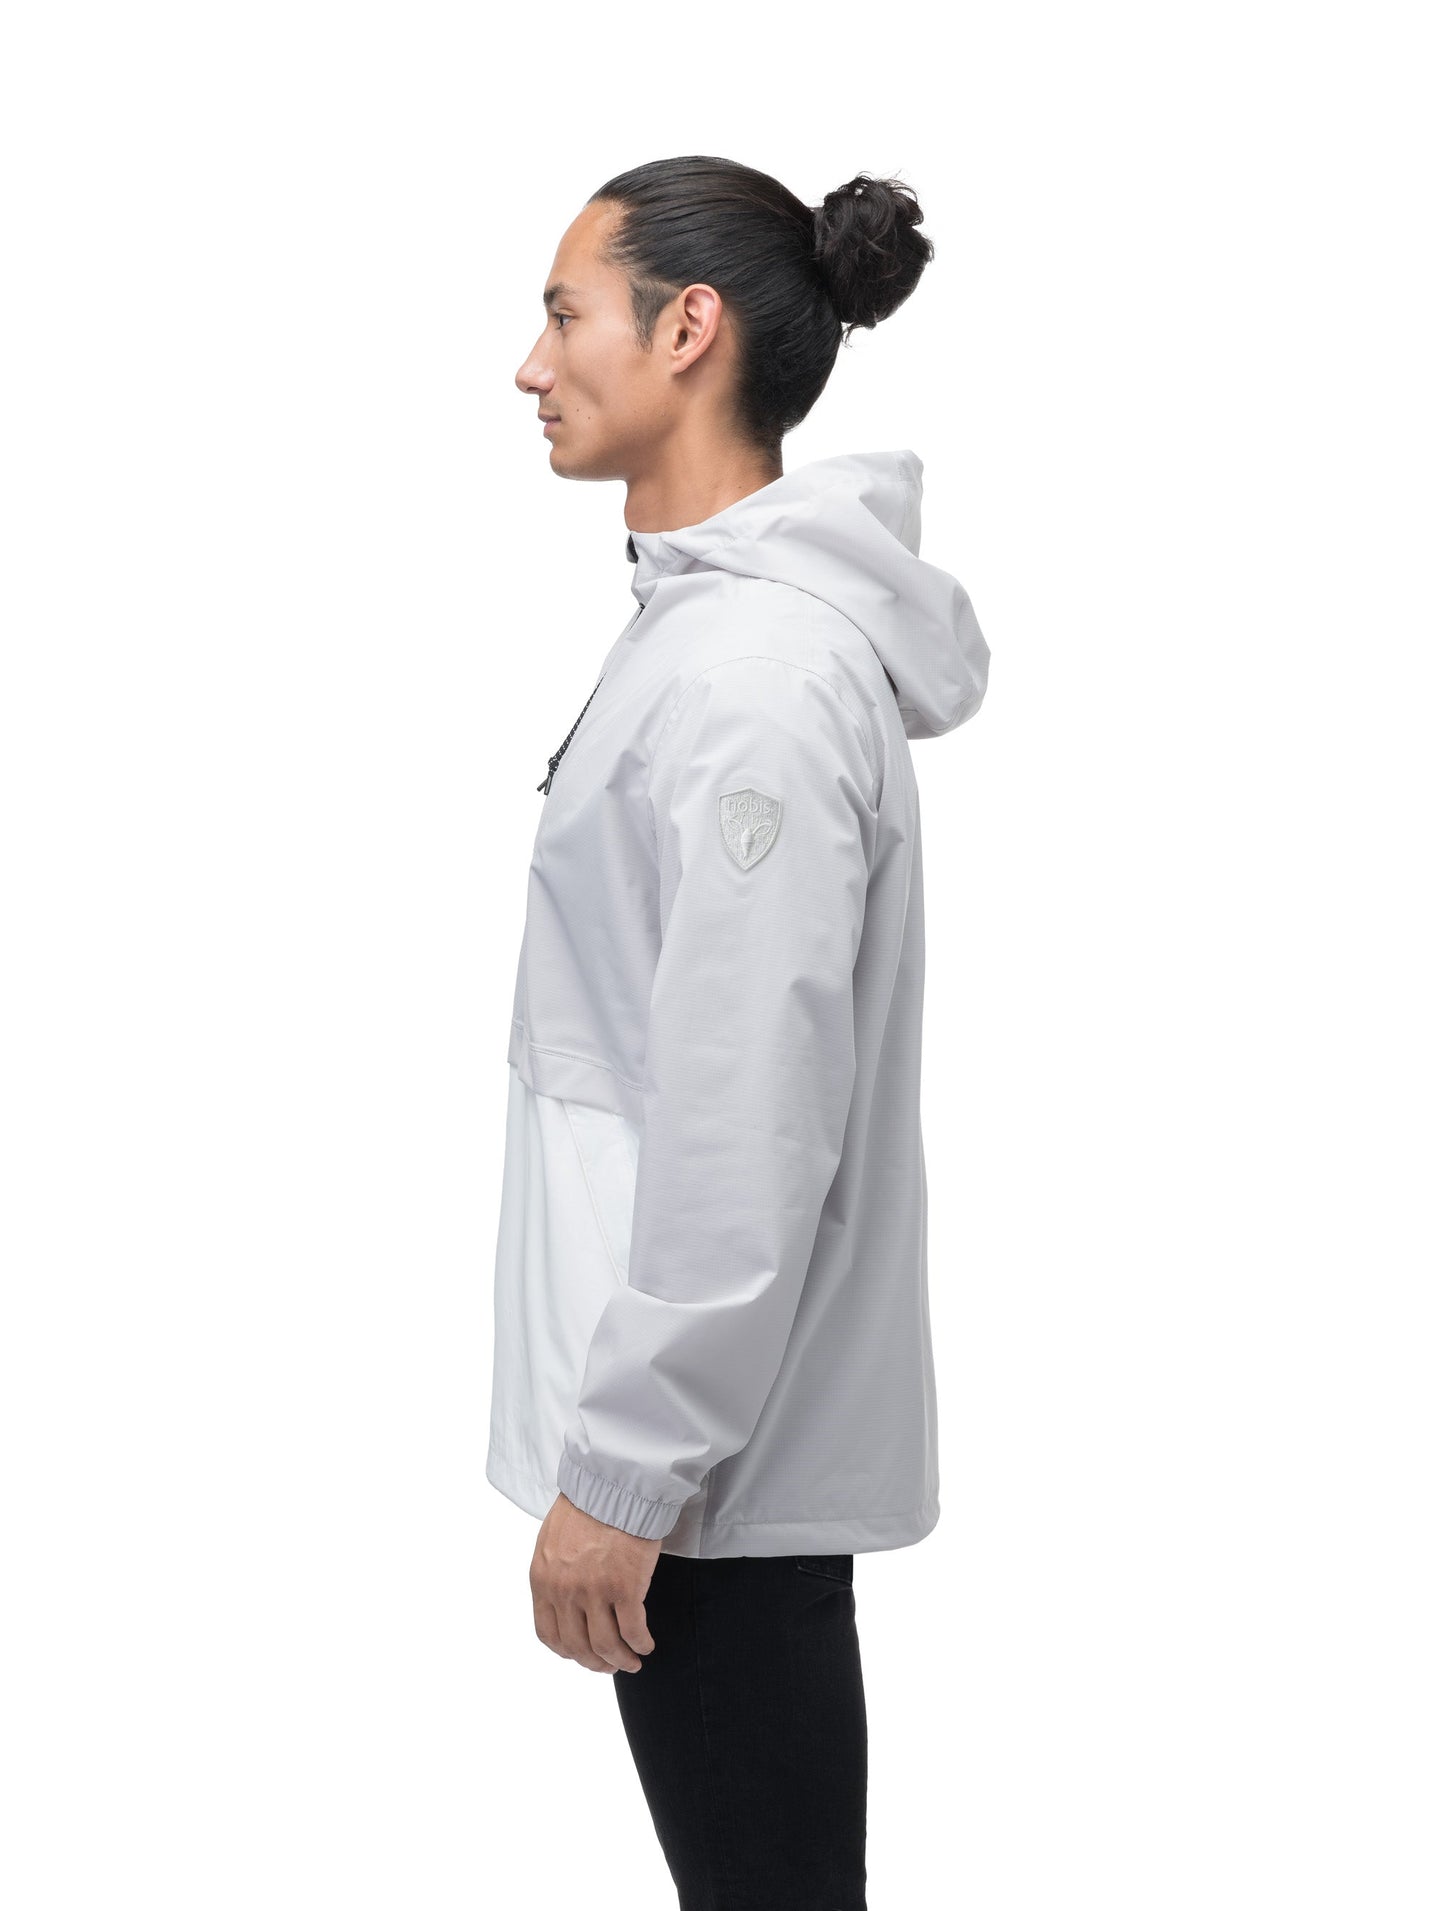 Men's hip length hooded pullover anorak with zipper at collar in Light Grey/Chalk